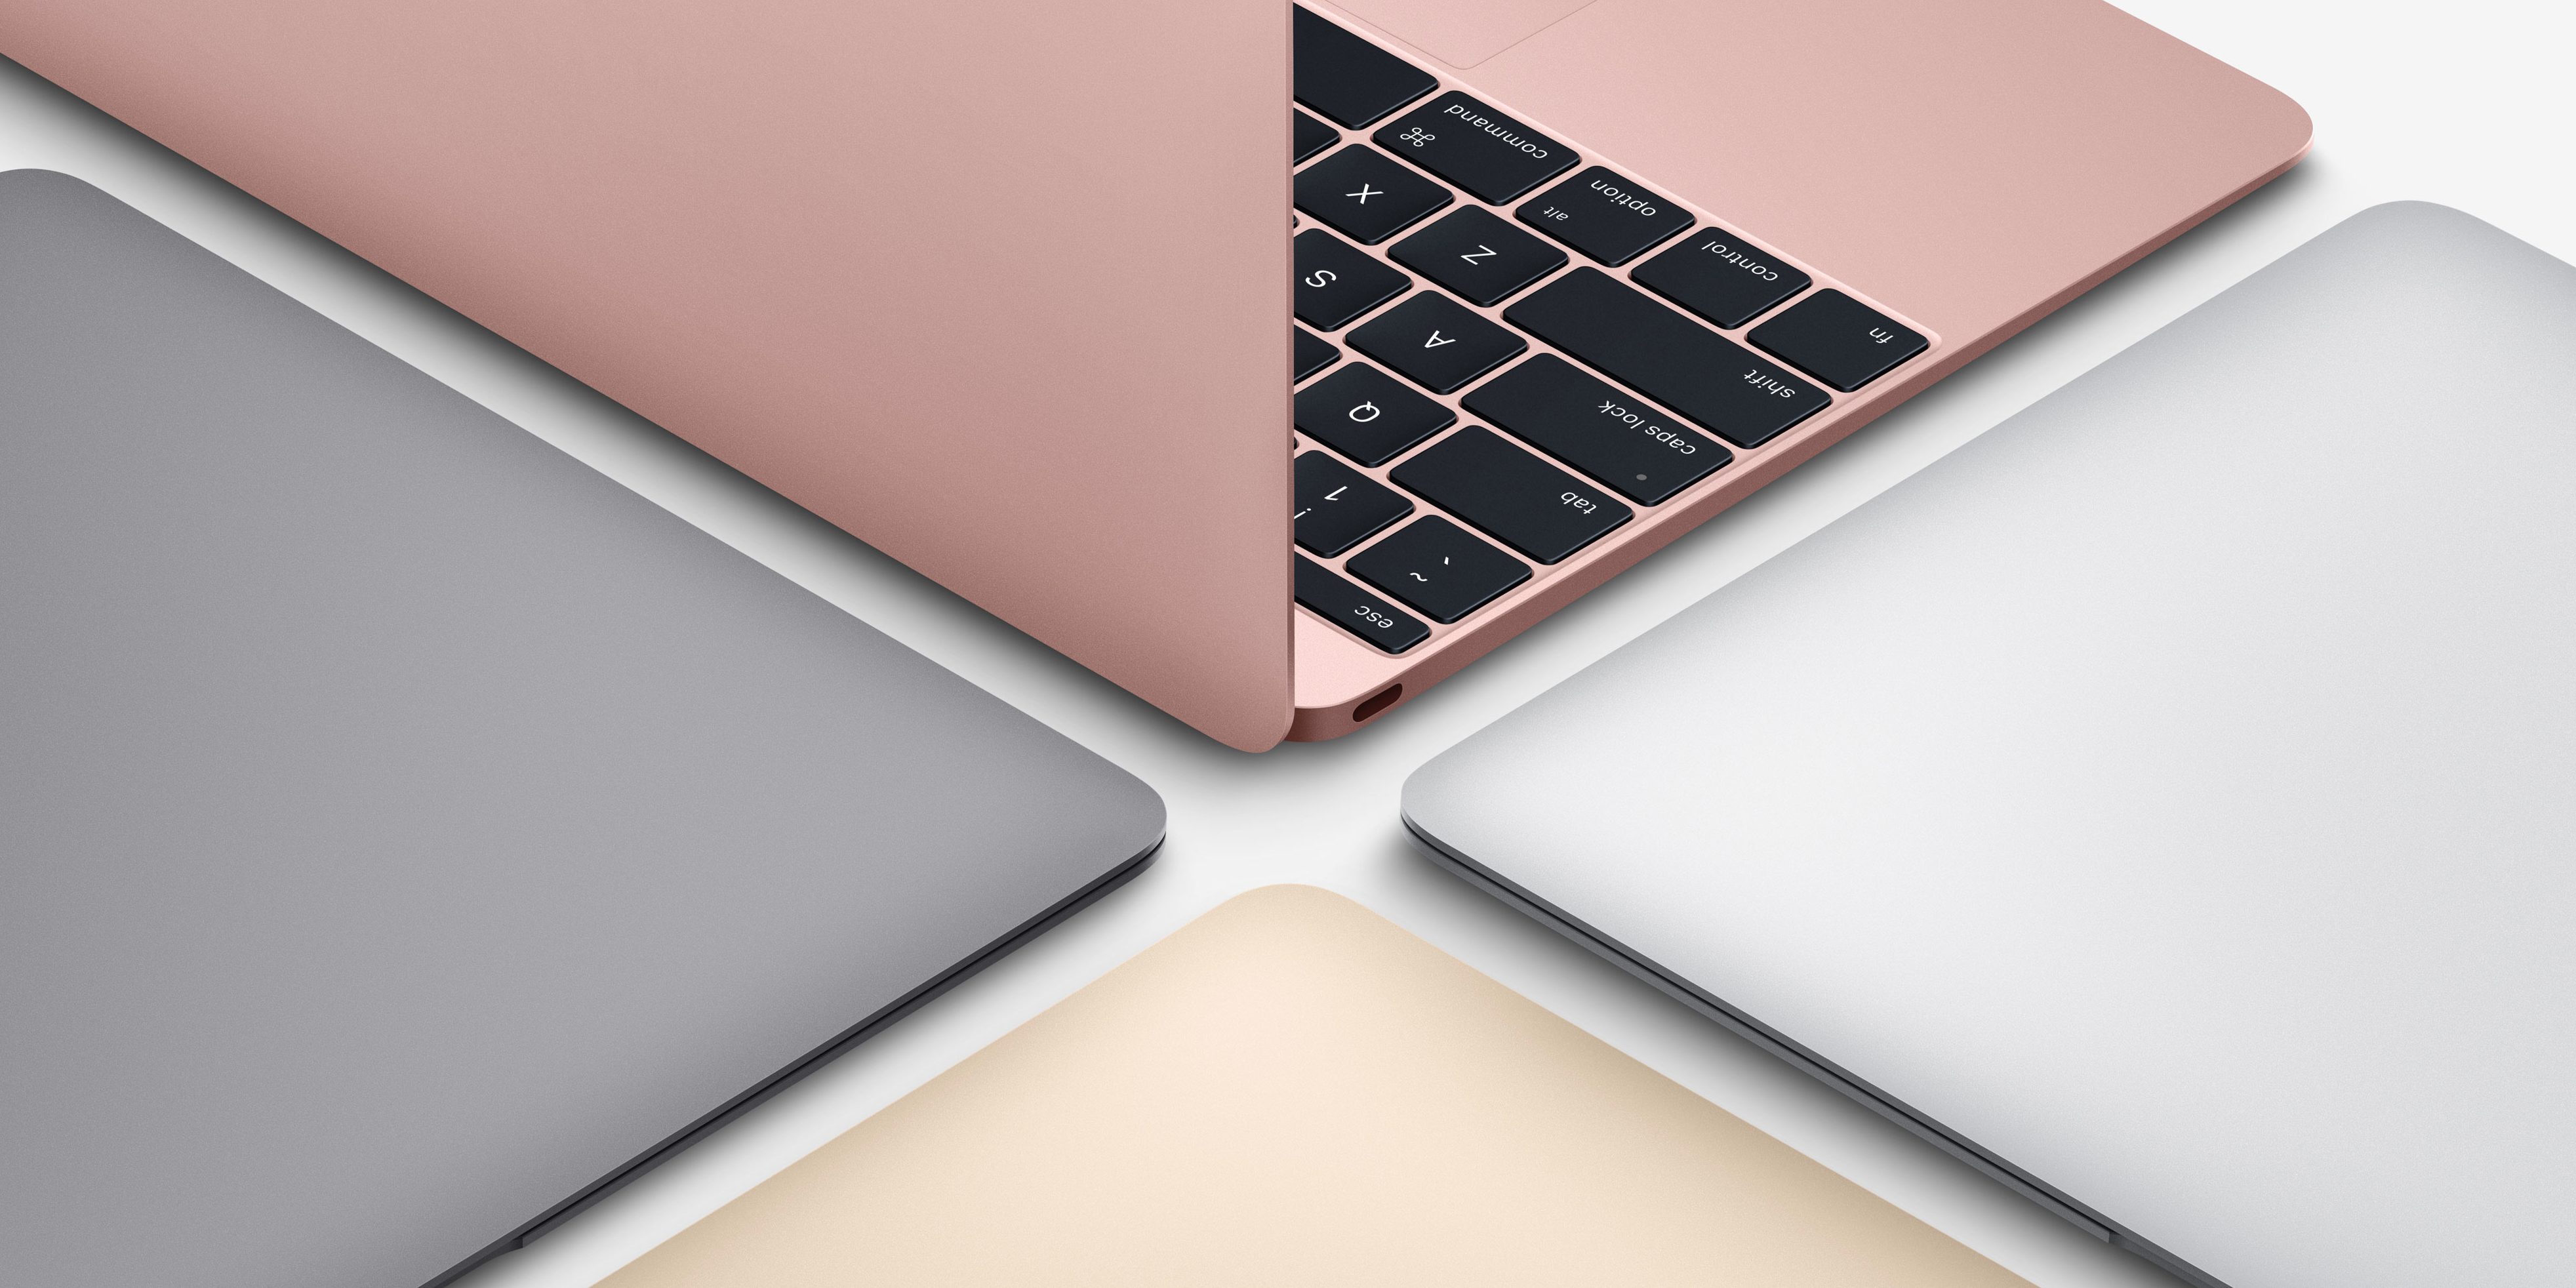 Comment: A new 12-inch MacBook couldn't fit Apple's current Mac lineup